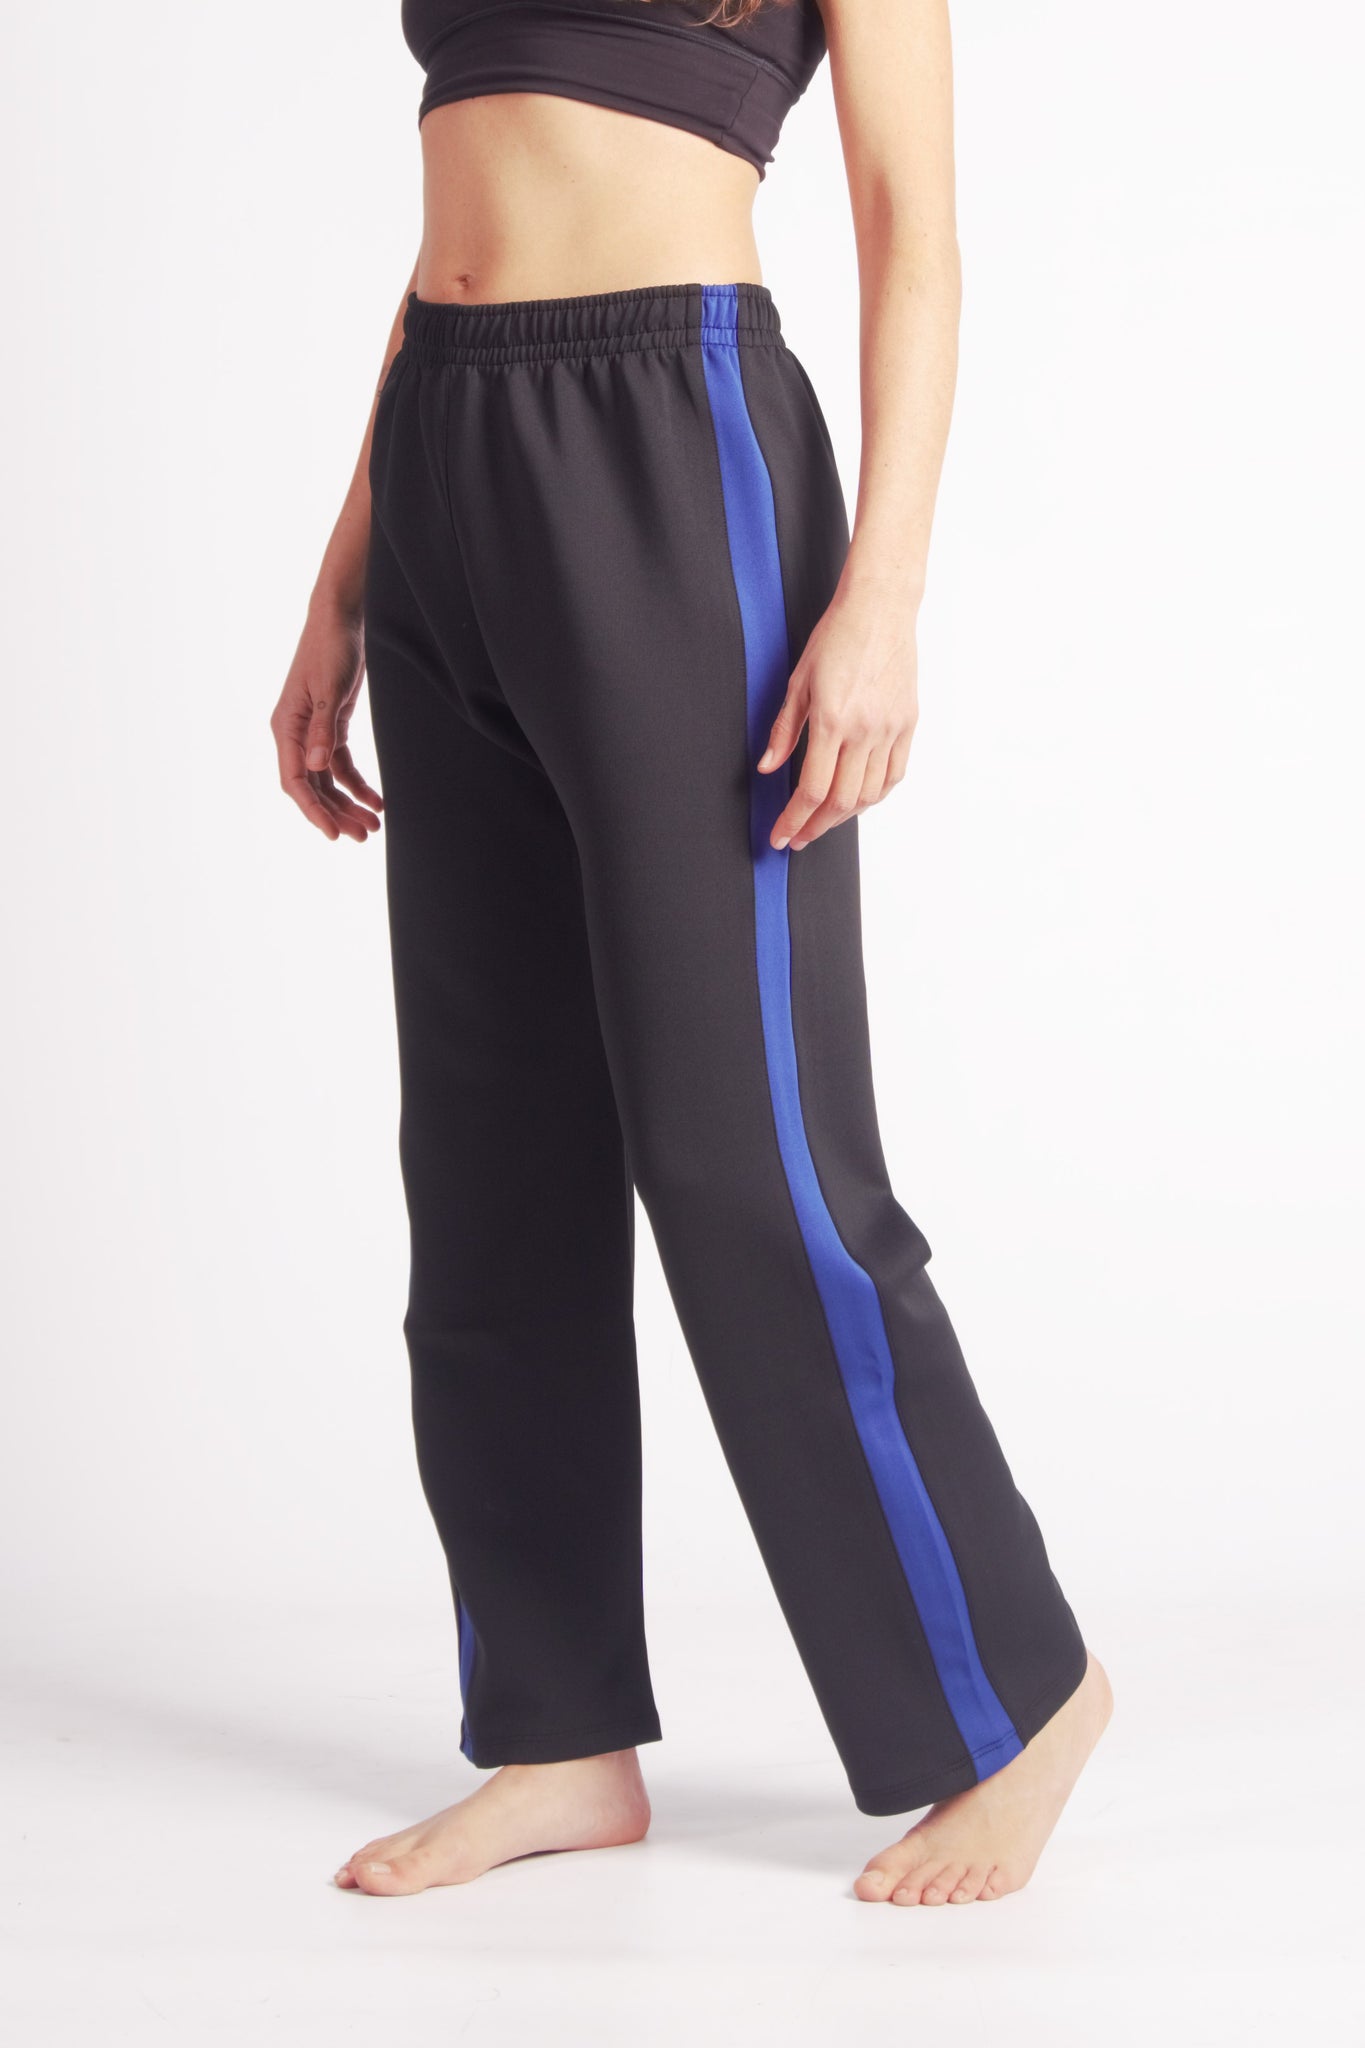 Wish | Shop and Save | Sports trousers, Dance pants, Type of pants